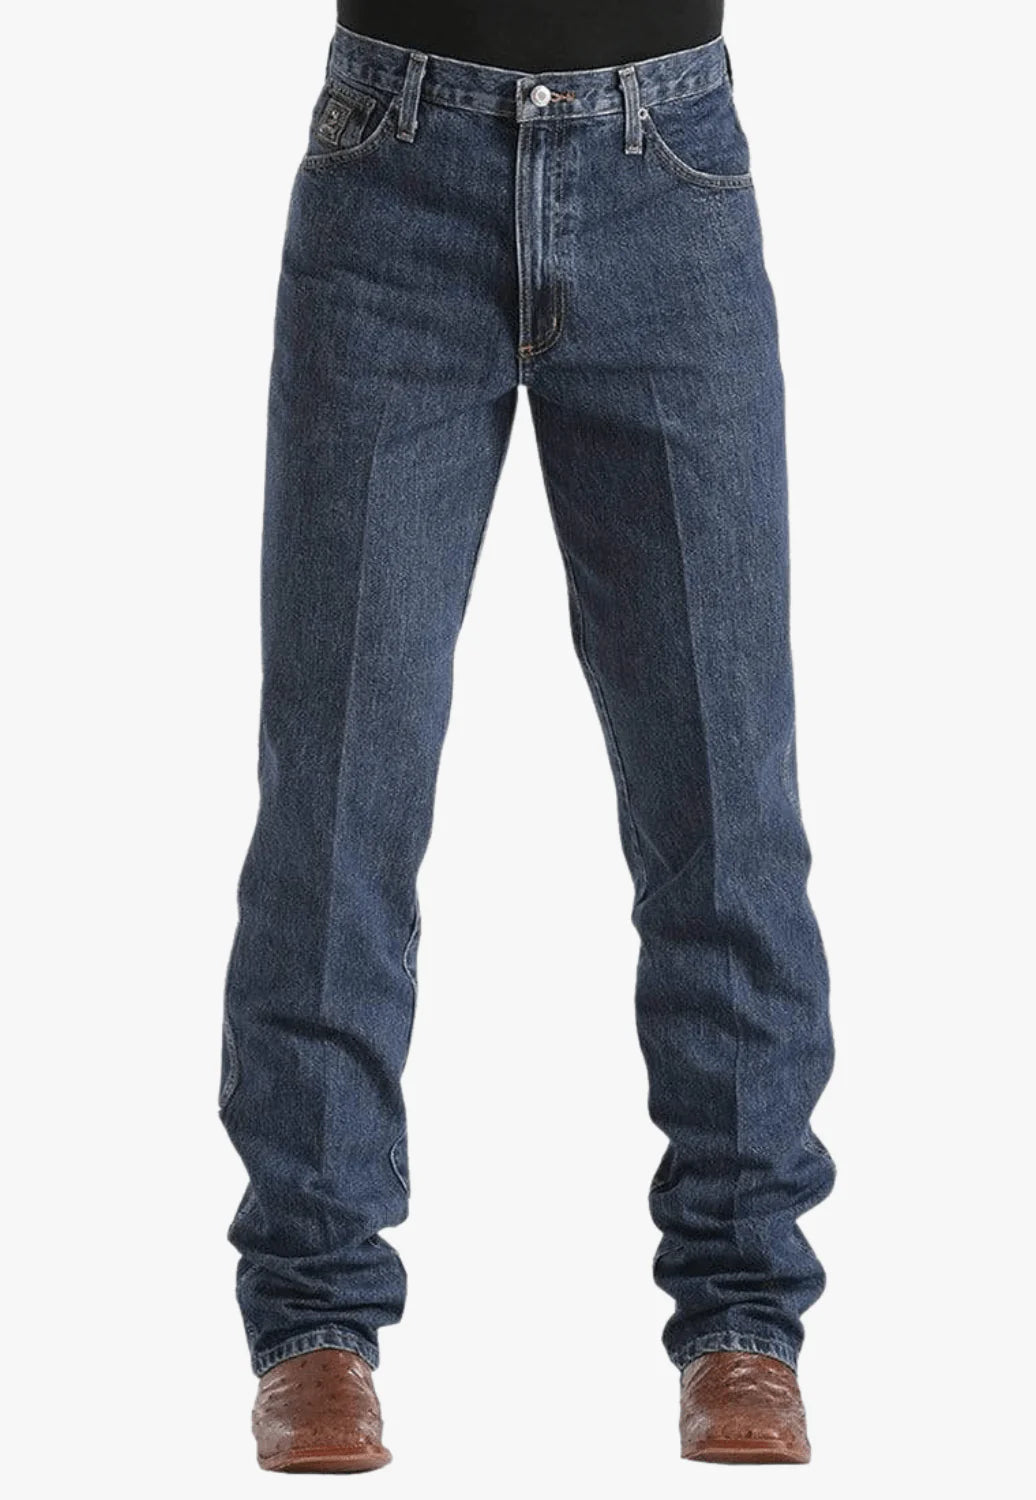 Cinch Green Label Mens Relaxed Fit Jeans